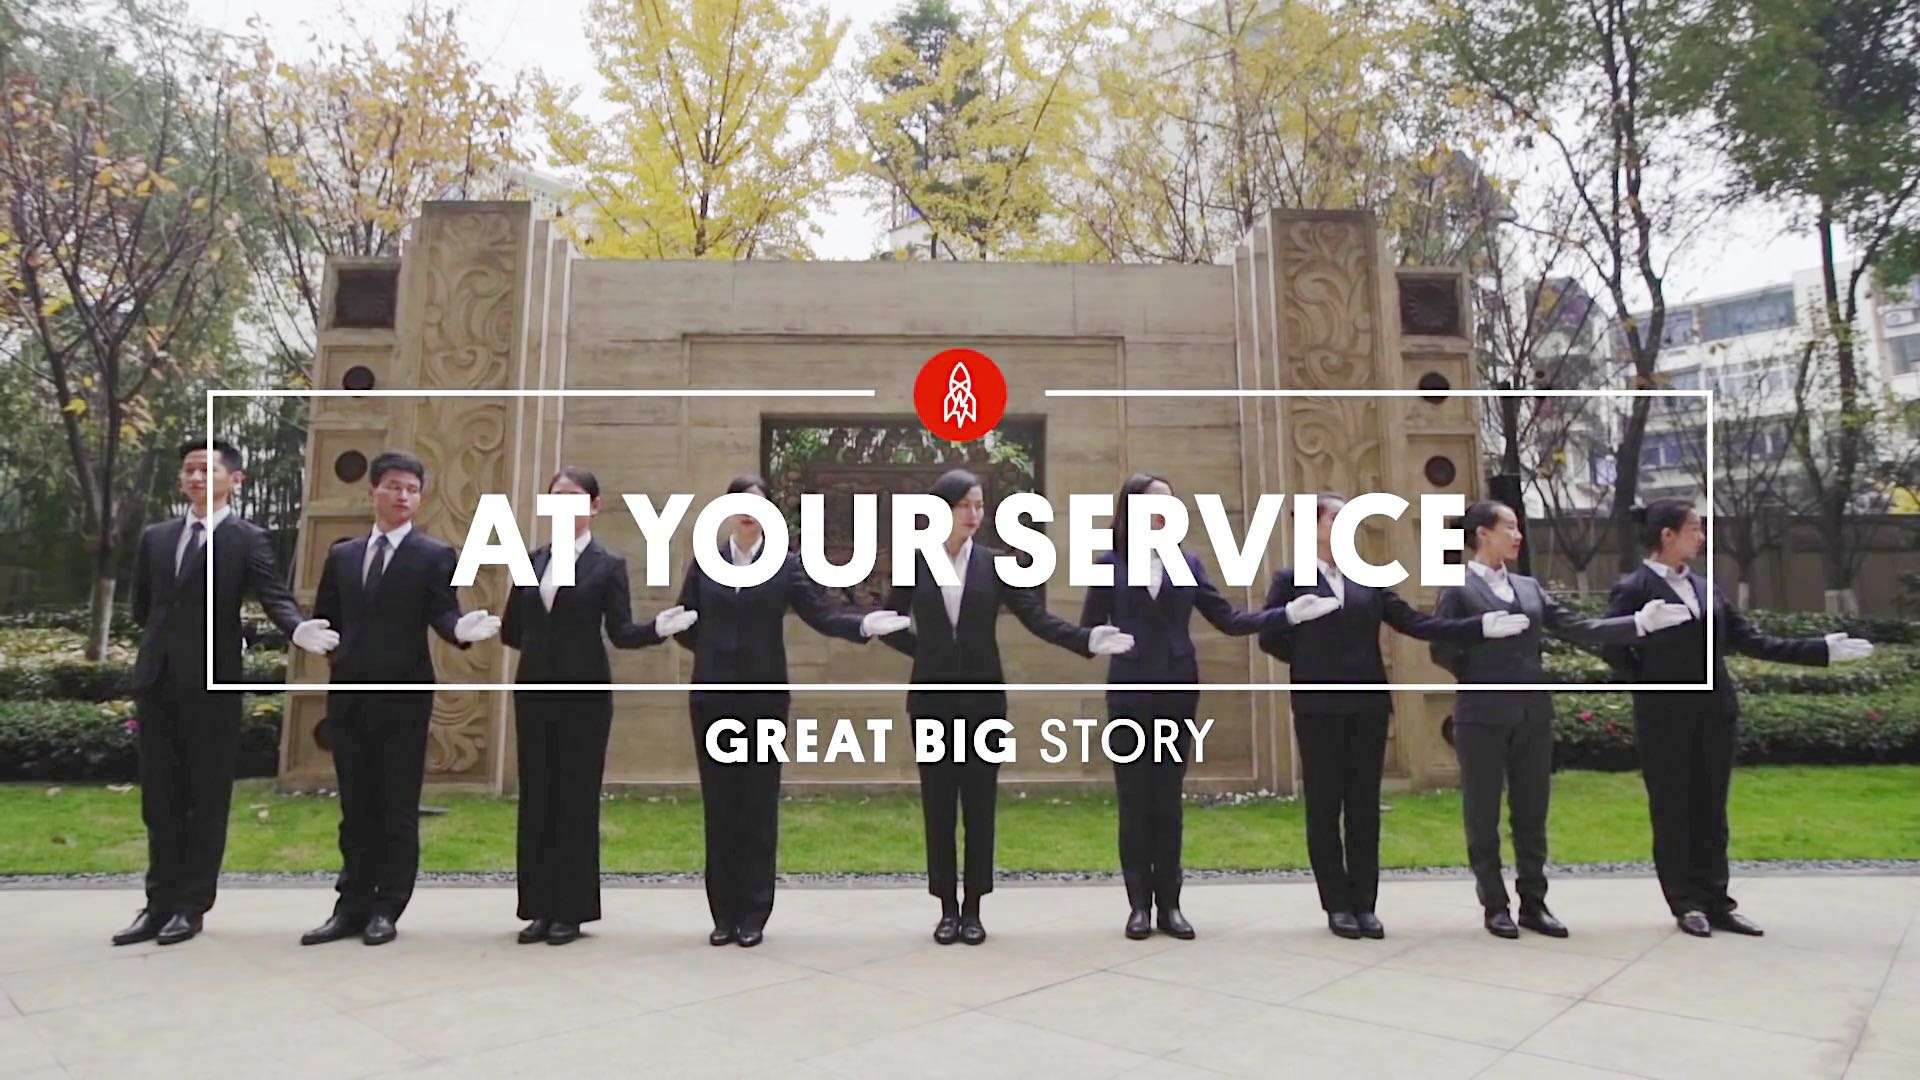 Great Big Story短纪录片丨At Your Service